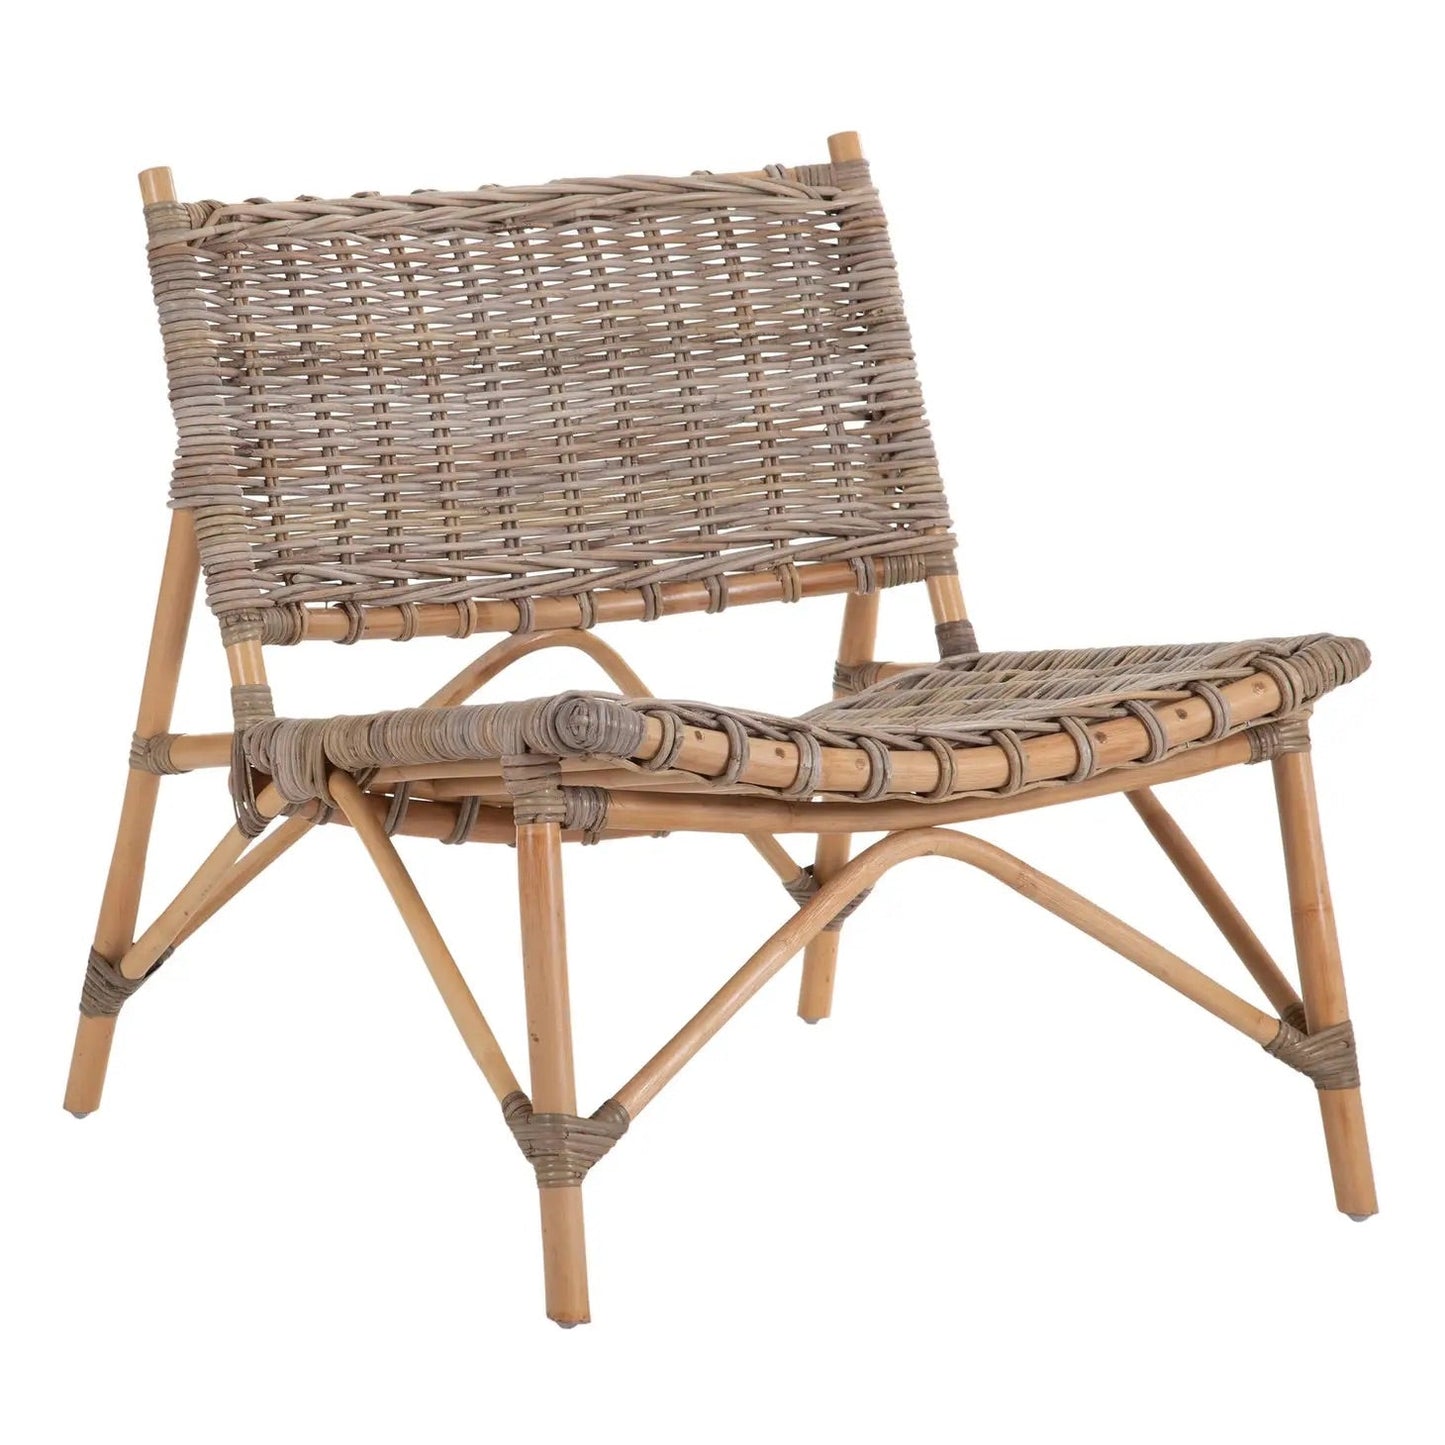 Natural Woven Rattan Lounge Accent Chair Boho chic farmhouse designer luxury wide